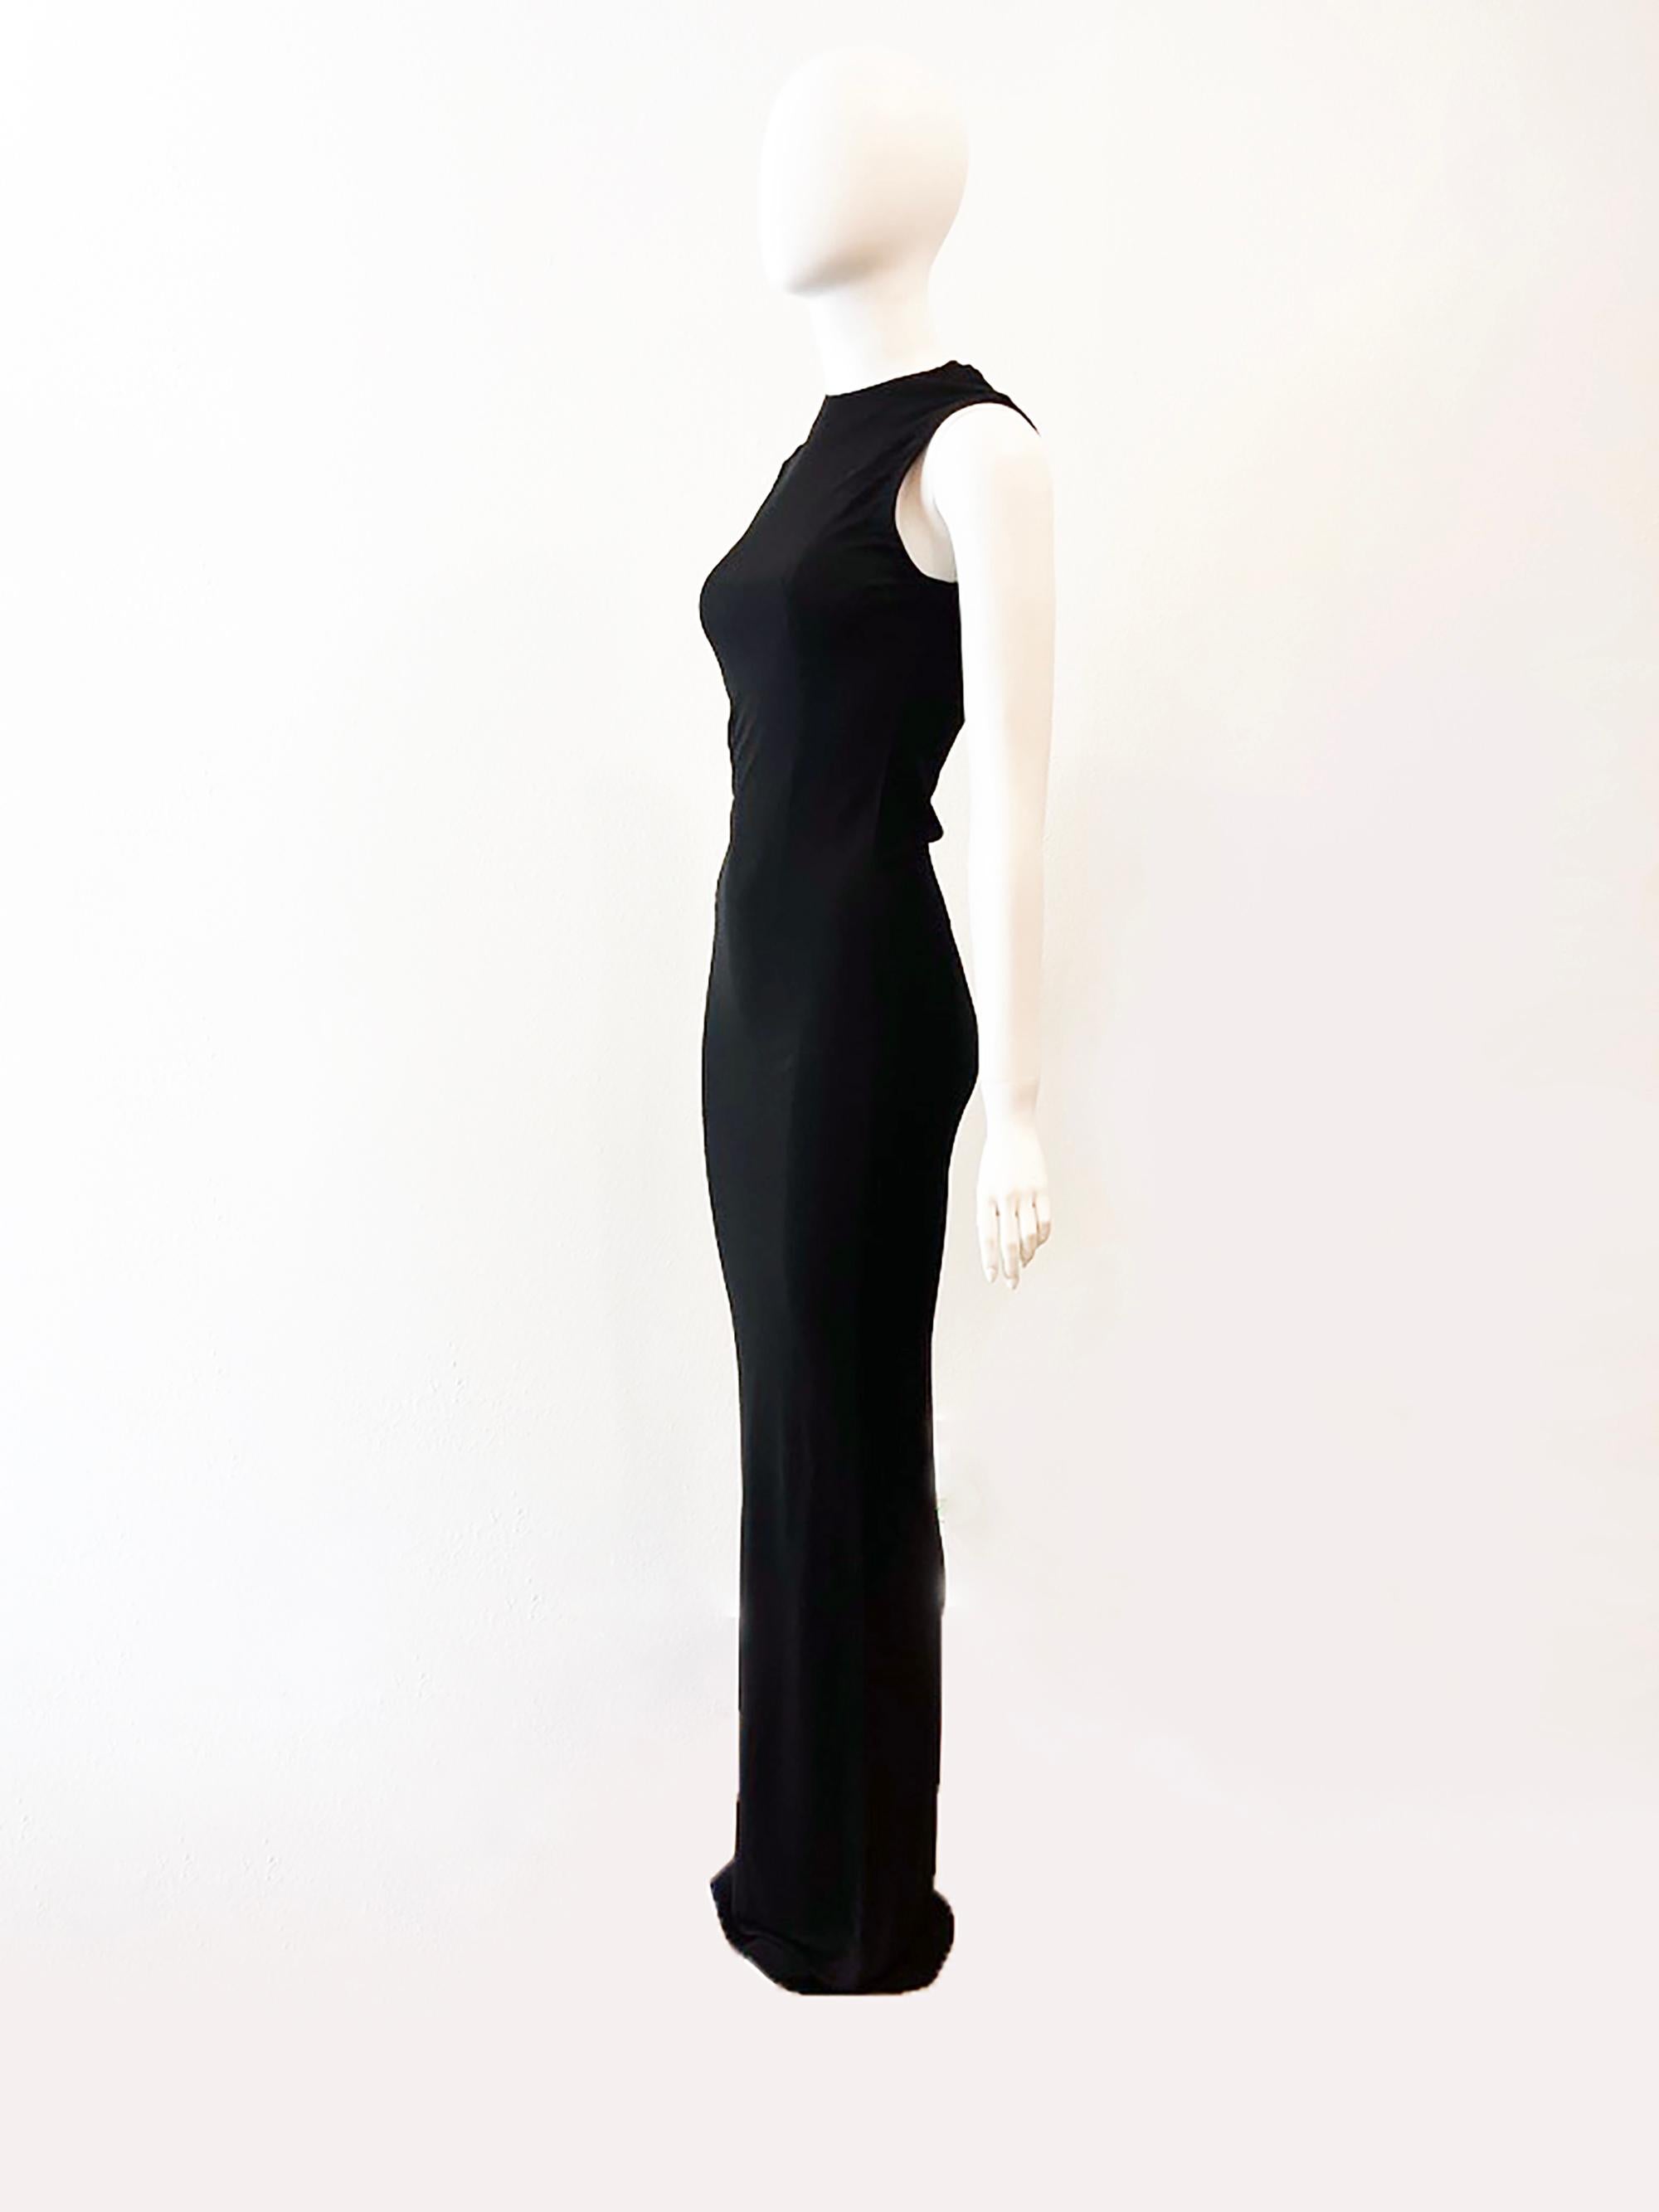 1997 Gucci by Tom Ford Semi-Sheer Stretchy Extra Long Black Gown
Condition: Excellent
Made in Italy
100% rayon 
bust:  26